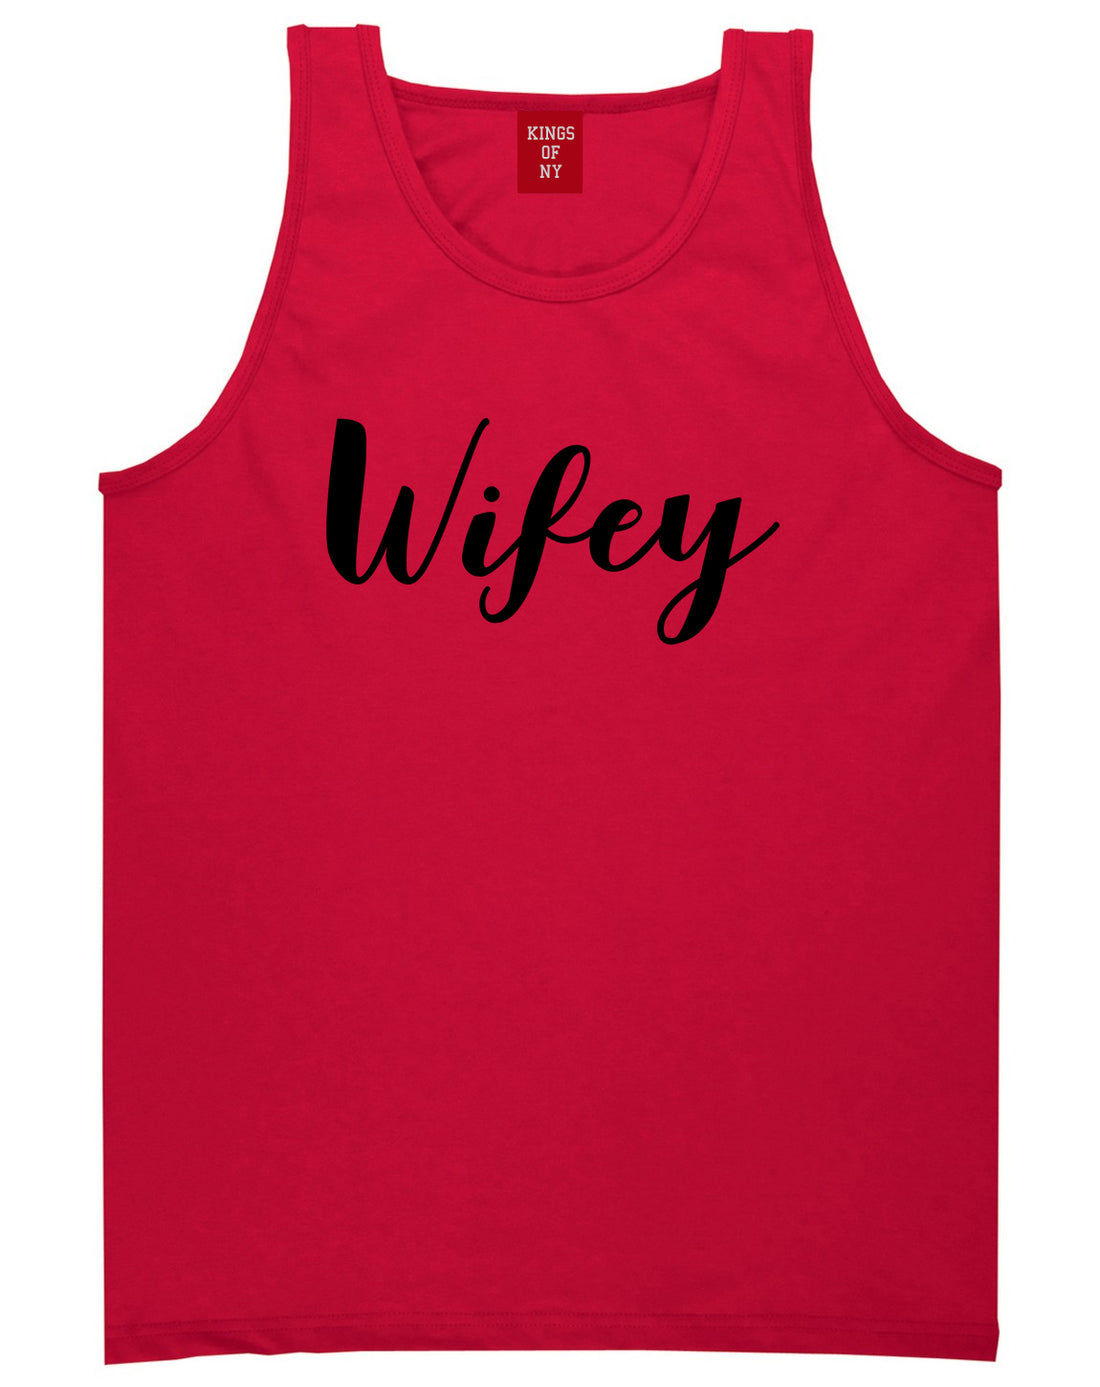 Wifey Script Red Tank Top Shirt by Kings Of NY